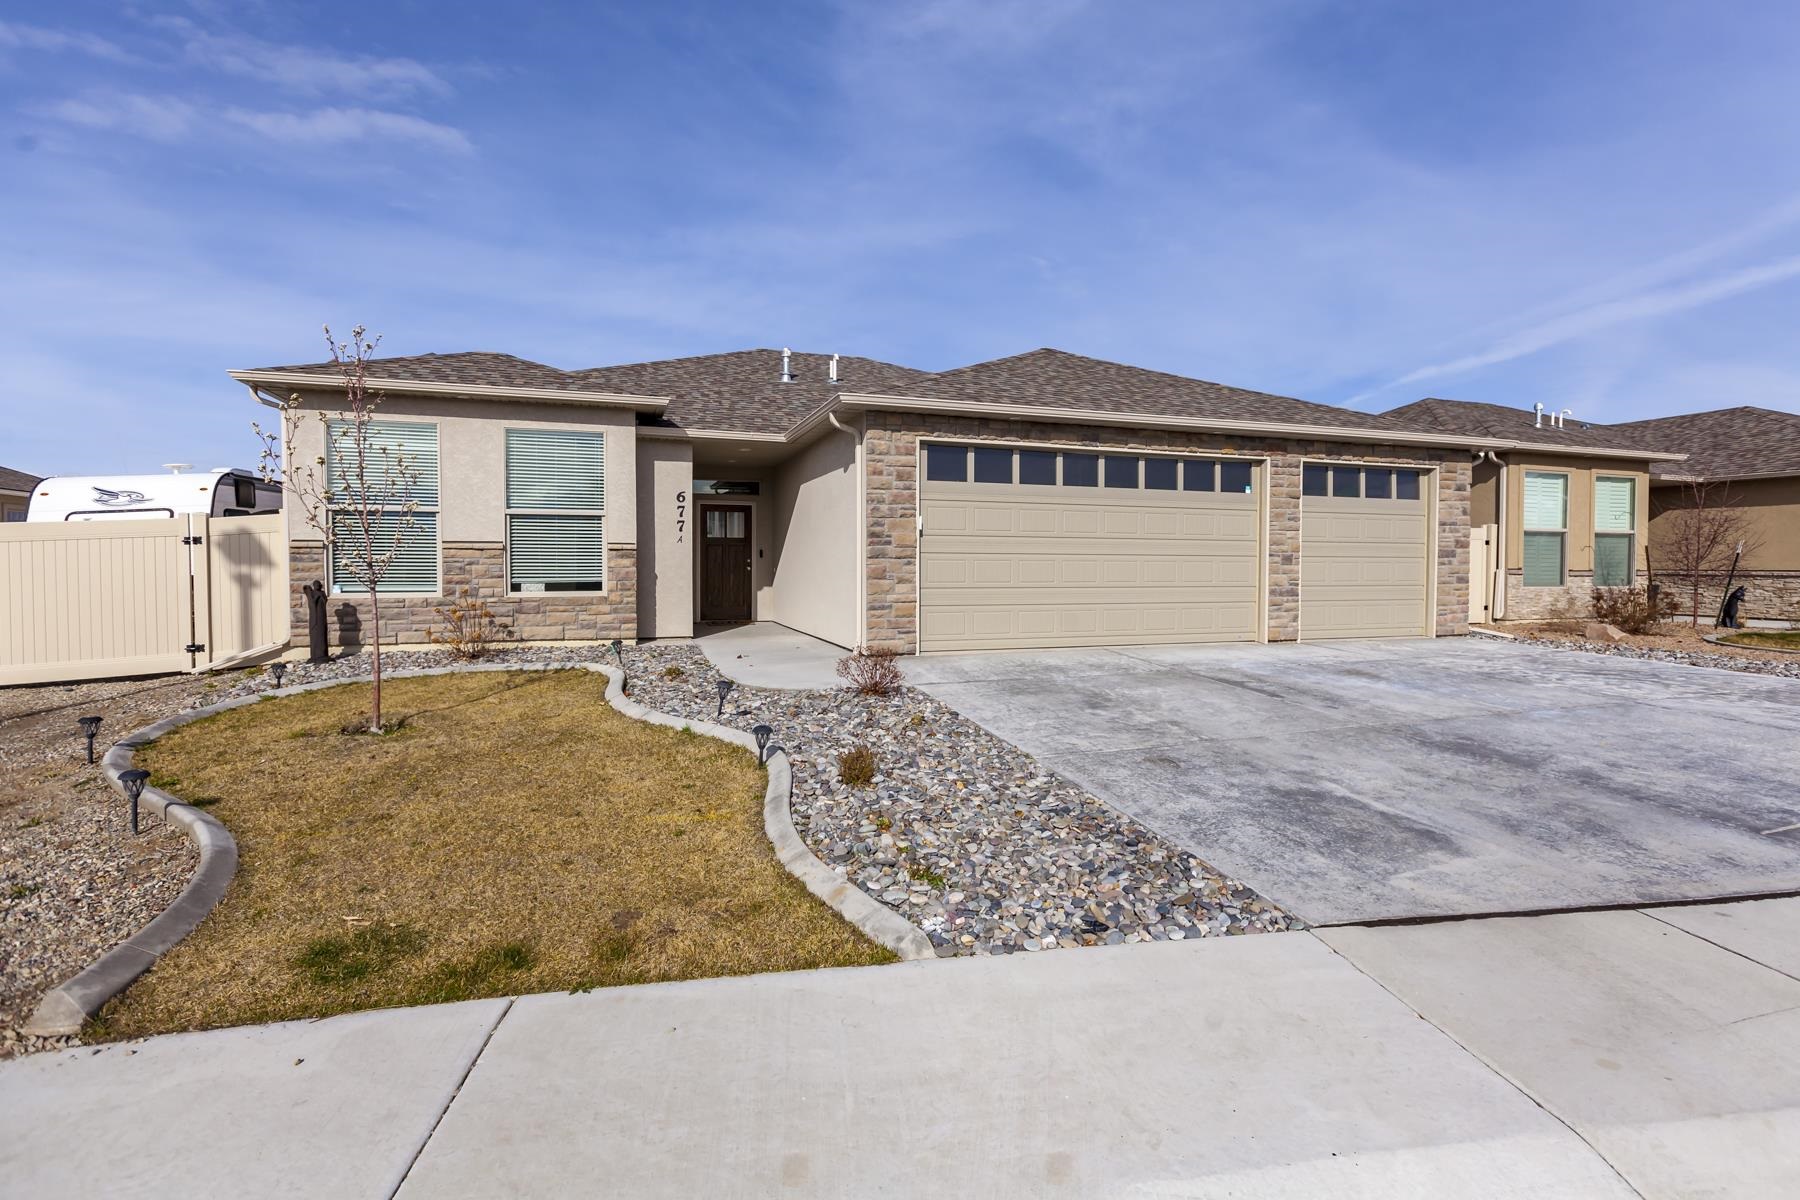 677 Strathearn Drive A, Grand Junction, CO 81504